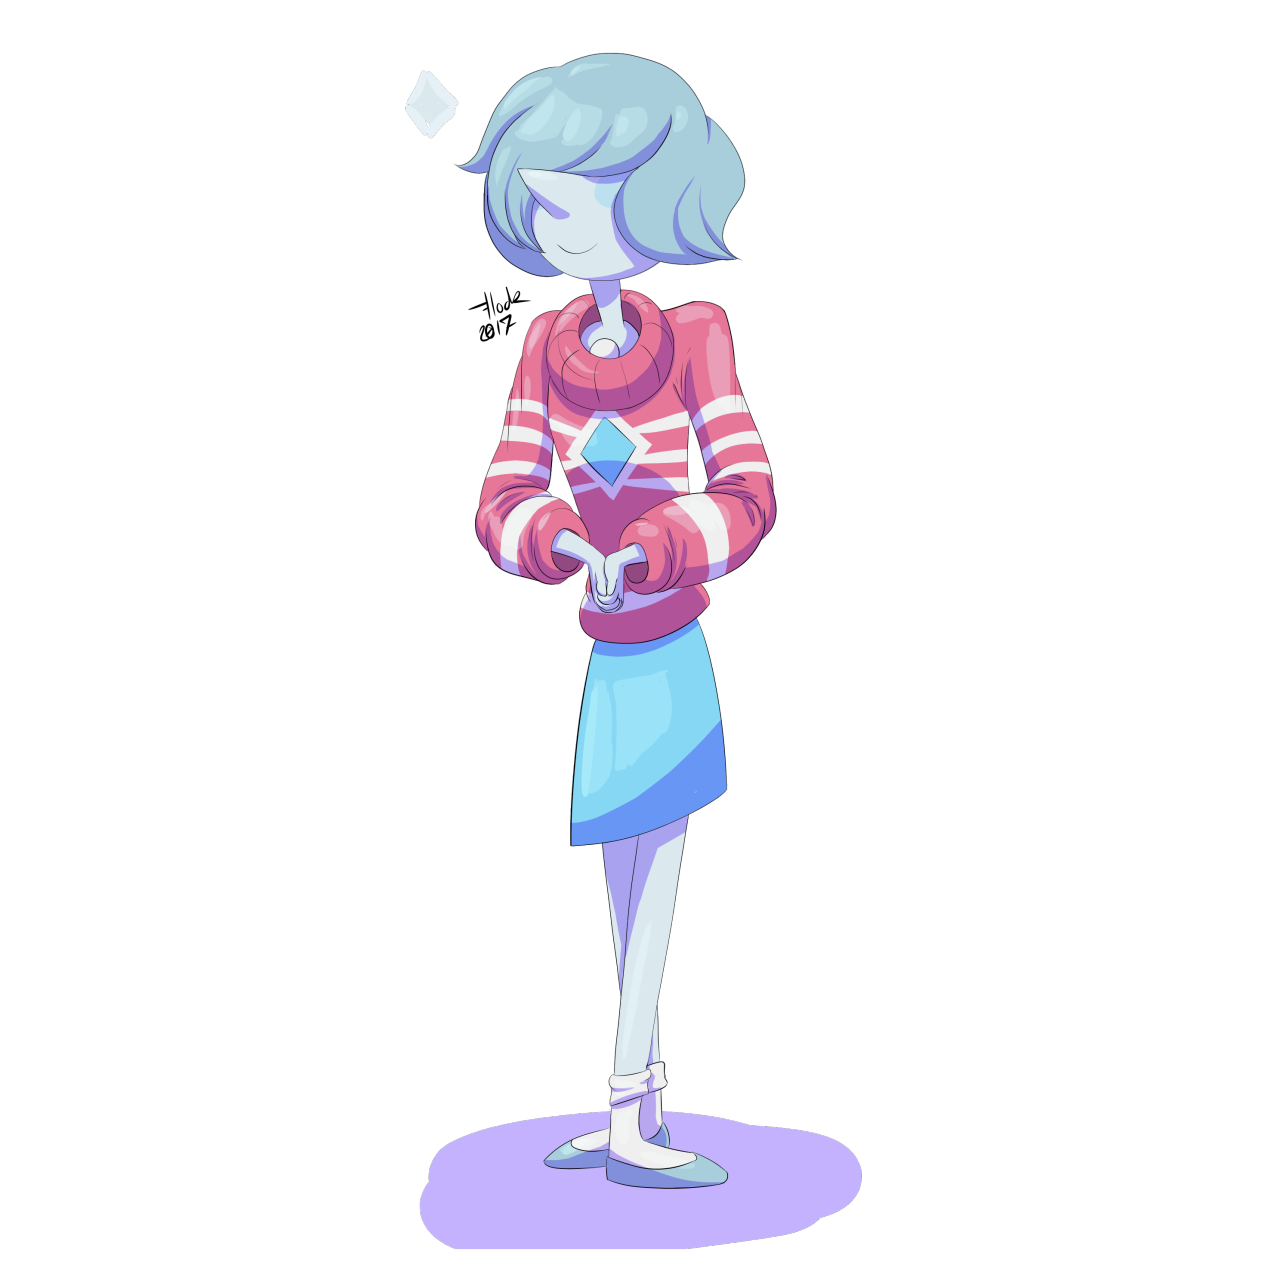 icehammer82 said: Blue Pearl wearing Mabel's(Gravity Falls)clothes. Answer: I think she likes it!